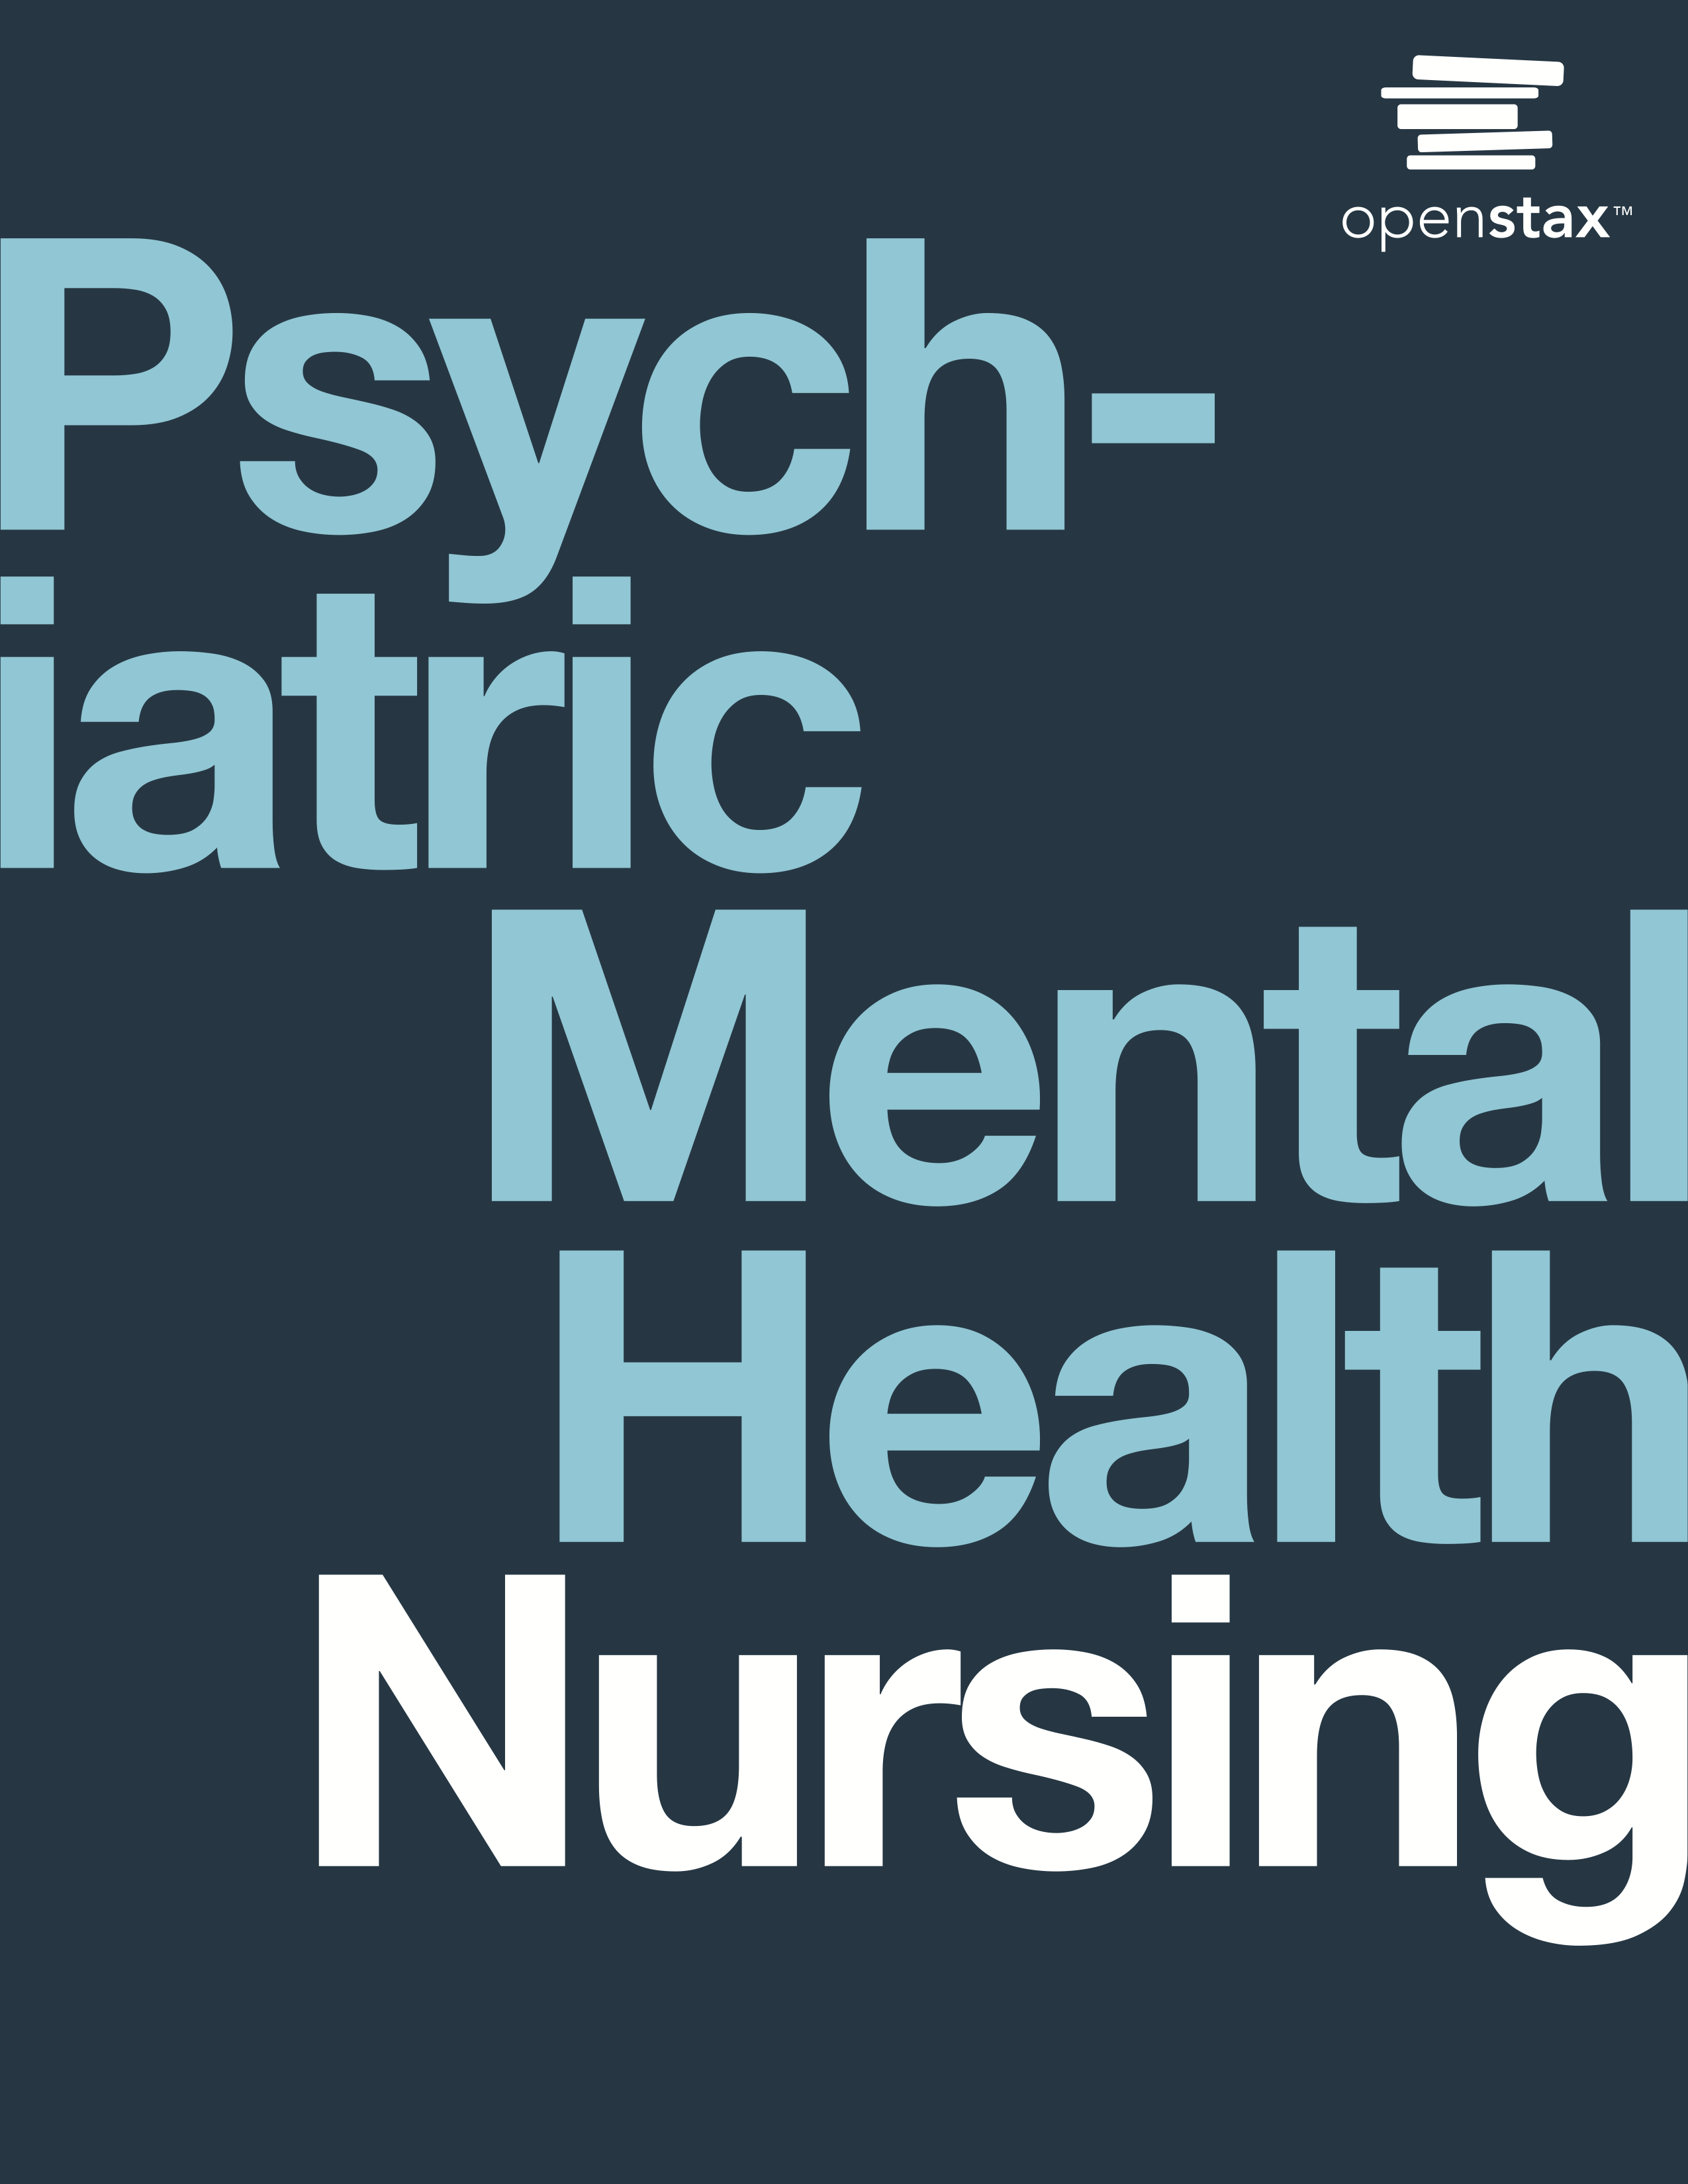 OpenStax Textbook Cover: White and yellow text on navy blue background. Text: Psychiatric-Mental Health Nursing